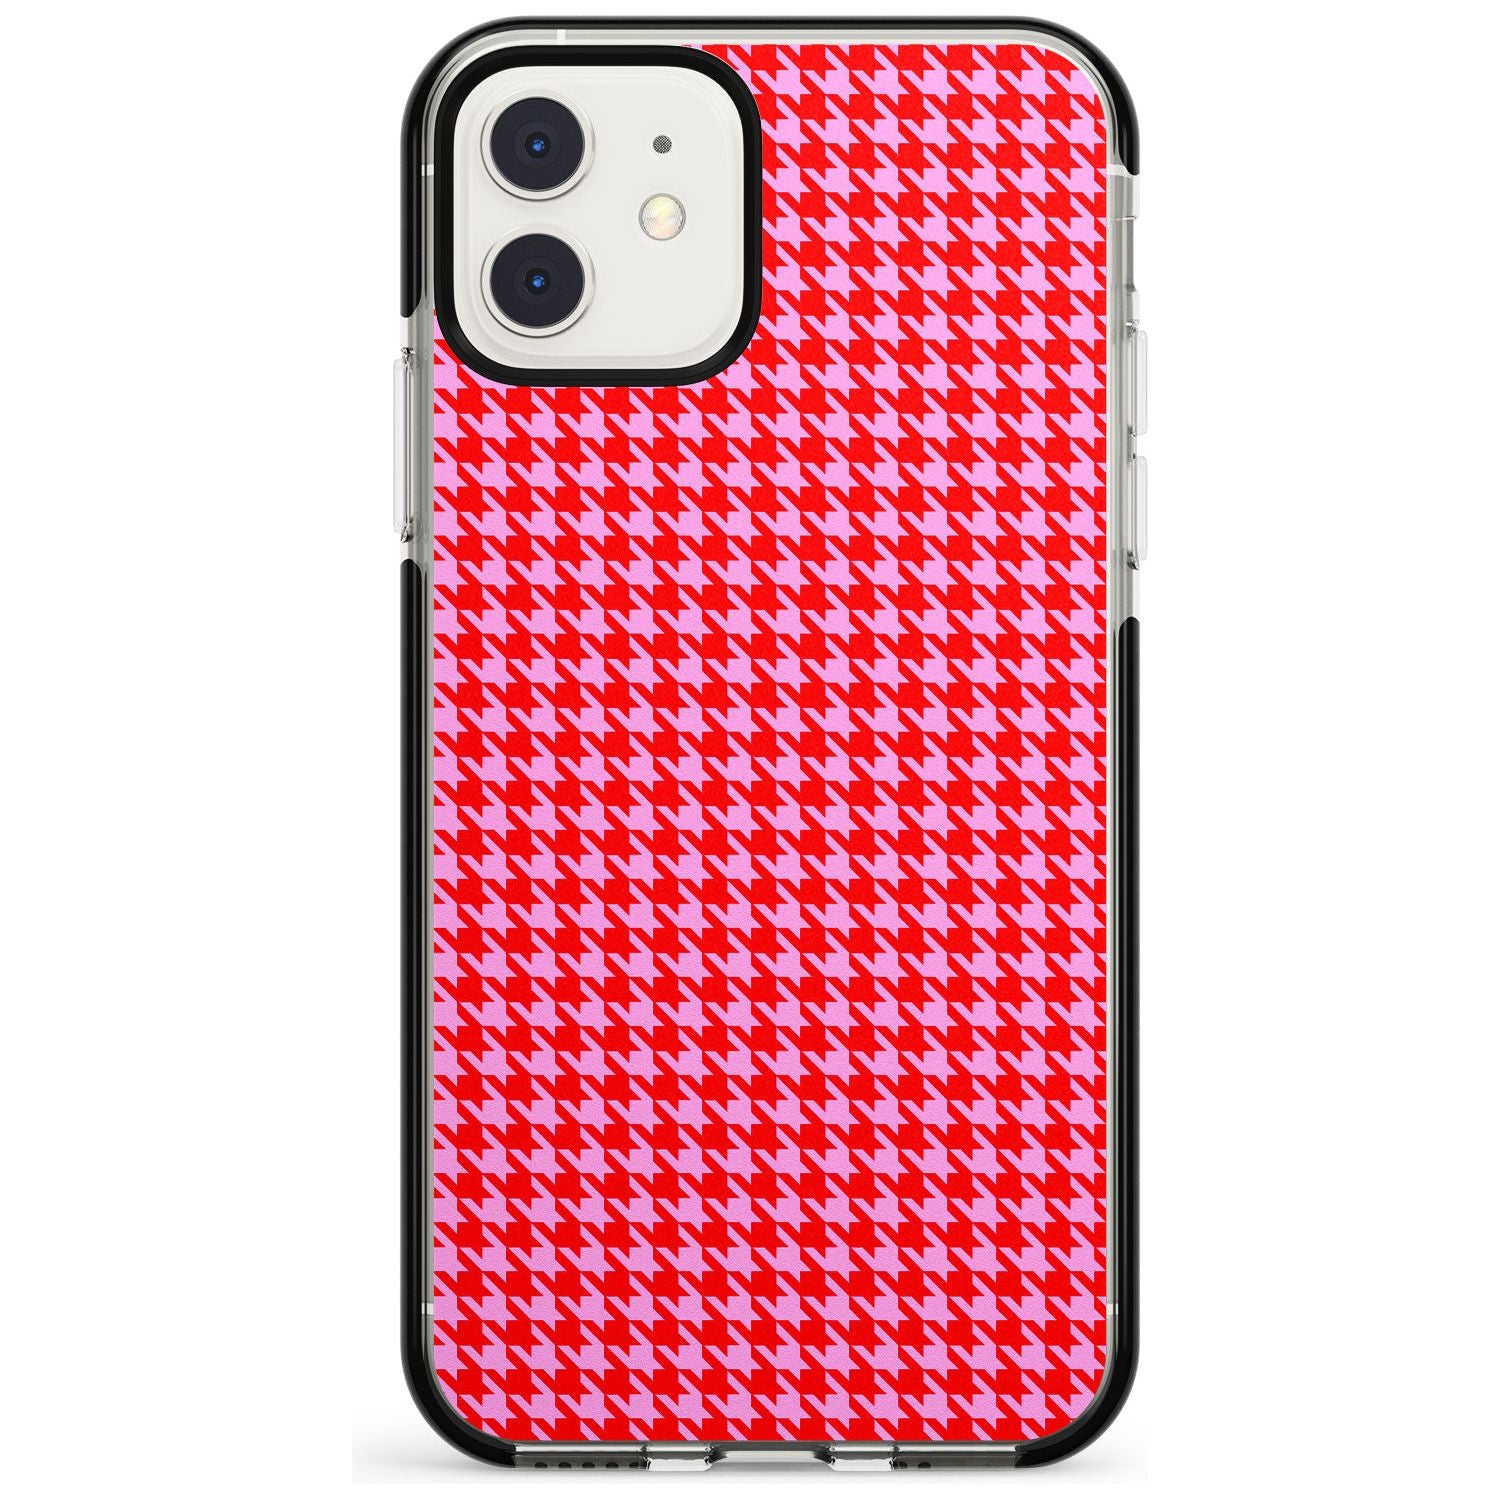 Neon Pink & Red Houndstooth Pattern Black Impact Phone Case for iPhone 11